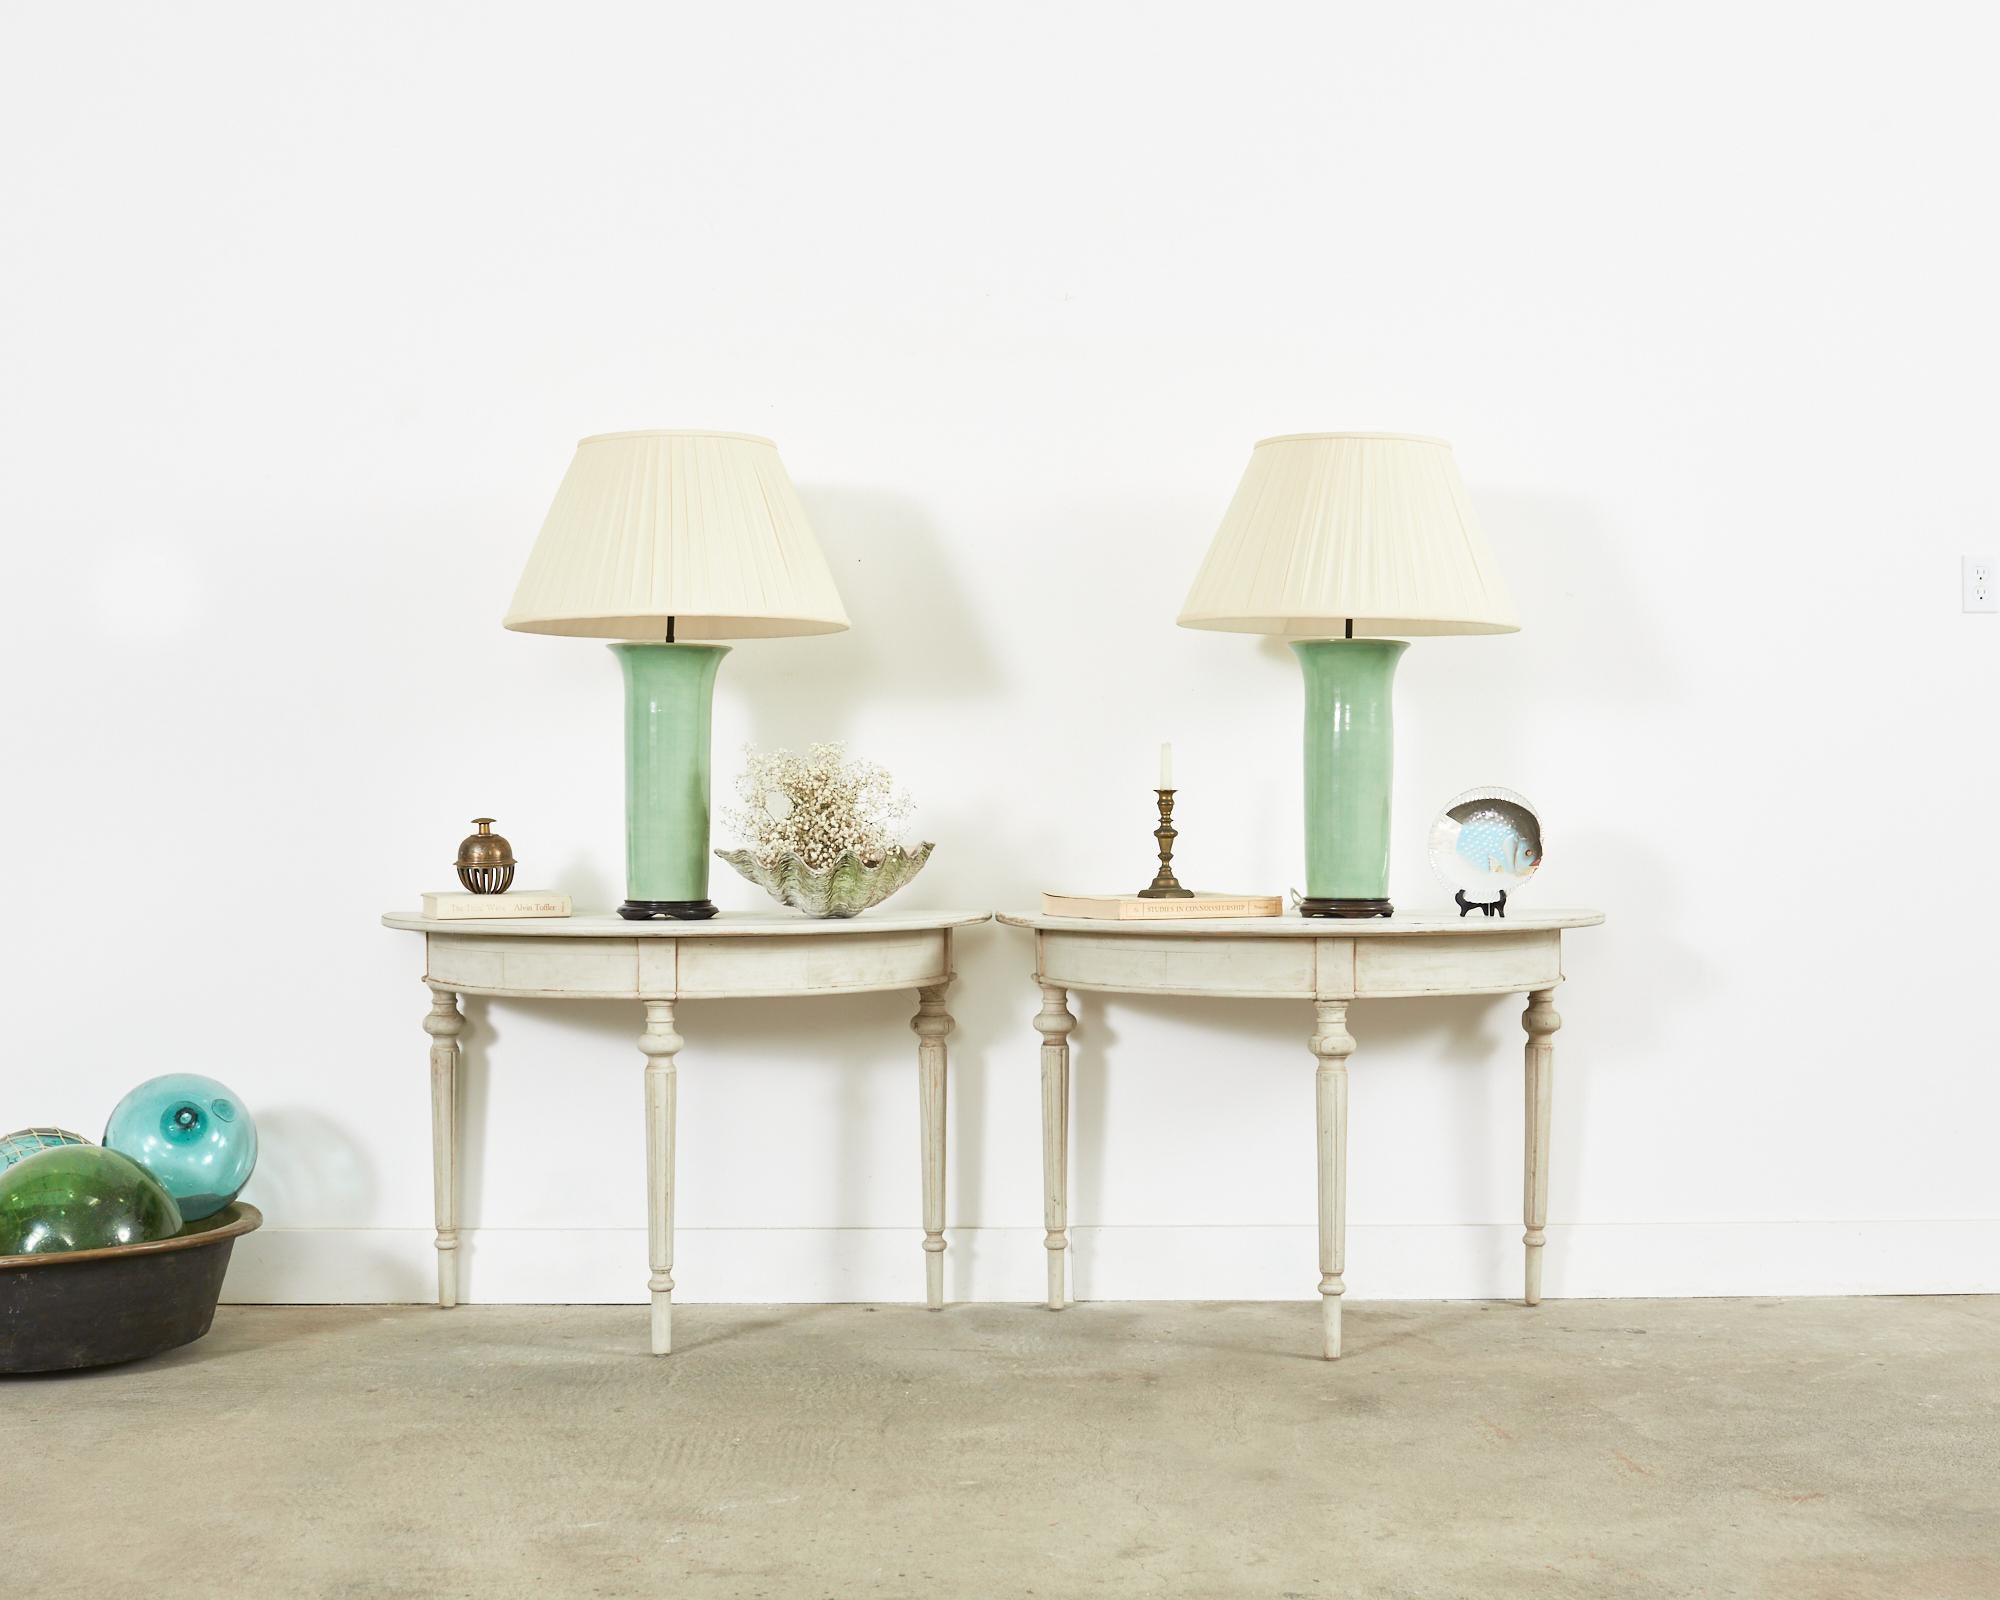 Exquisite pair of Swedish demi-lune console tables made in the Gustavian taste. Crafted from pine with a later painted finish. These tables were ends of a large banquet table and fit together to form a 45.5 inch round dining table or center table.